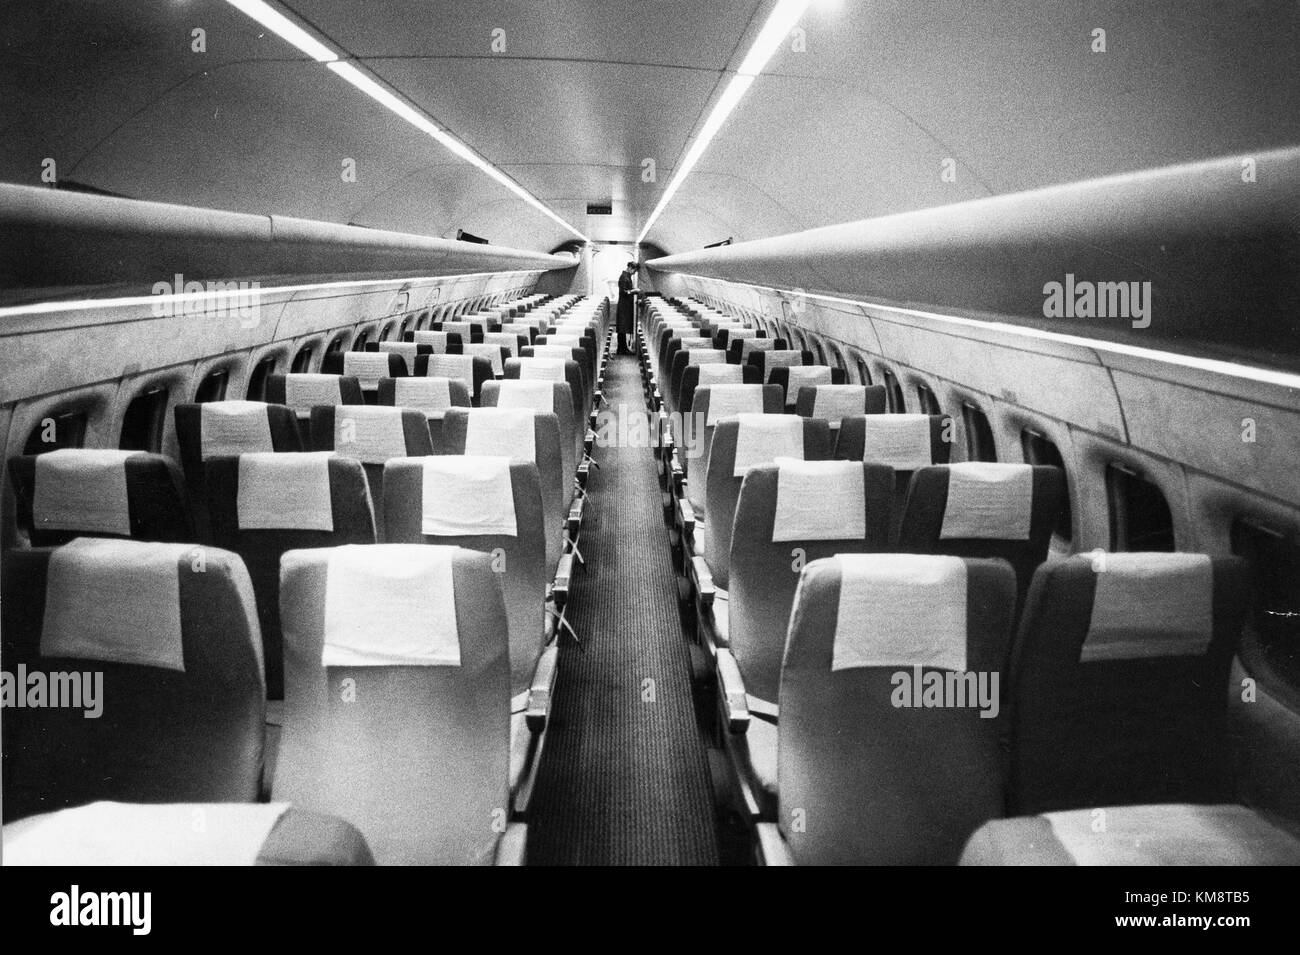 Sas Dc 8 33 Interior And Design Before Delivery Cabin New